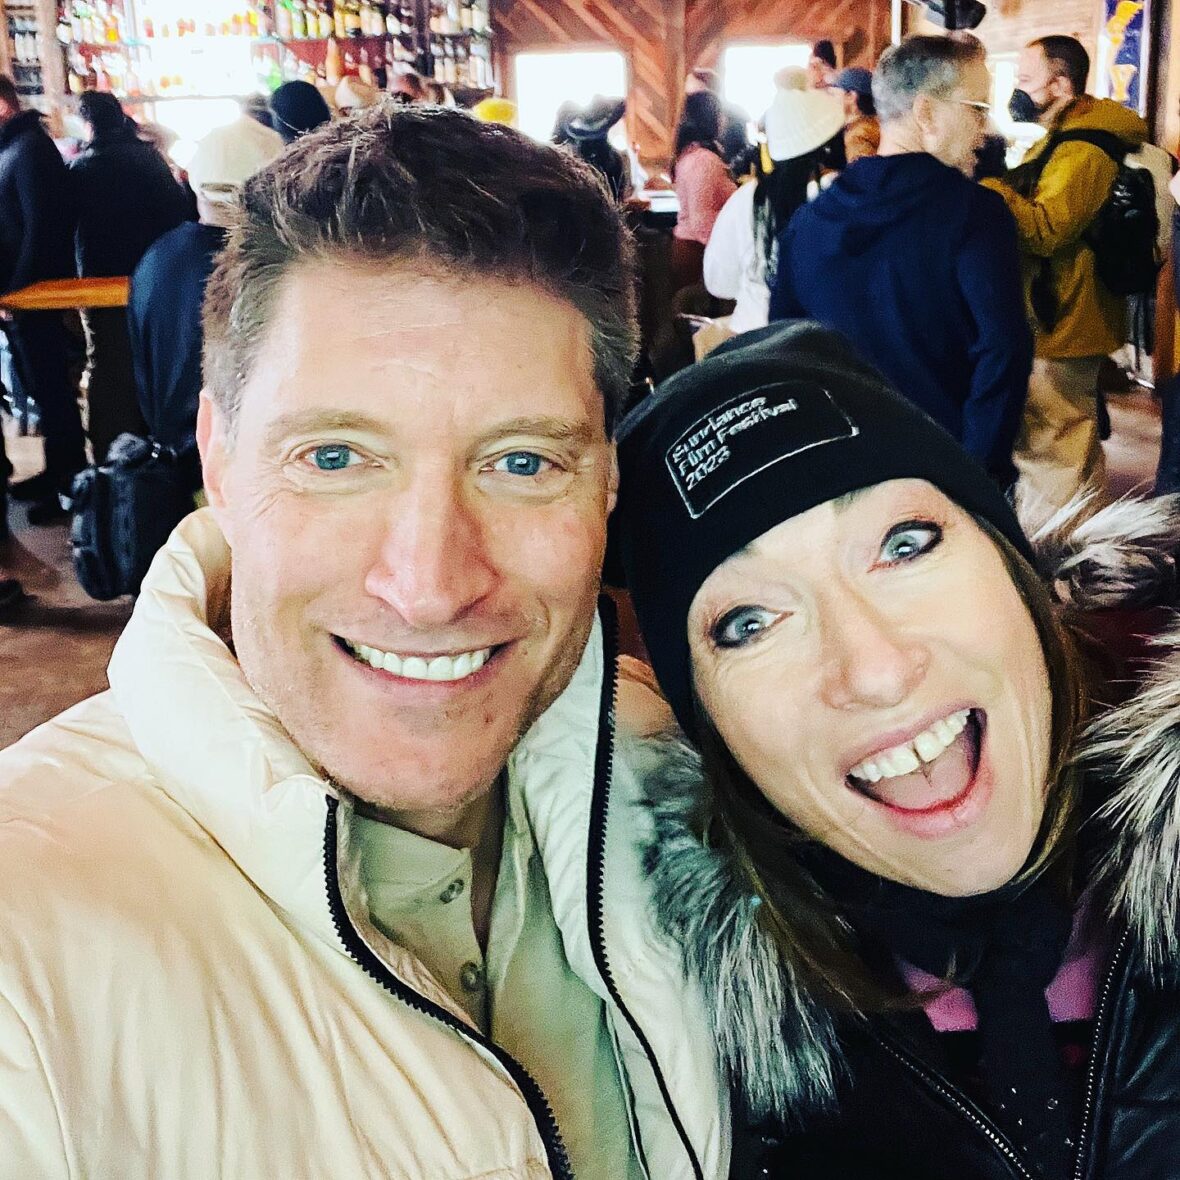 You are currently viewing Make new friends, but keep the old, one is 🤍 and the other is 💛. So fun seeing my old (young, handsome) pal, #cobrakai & #boldandthebeautiful’s @sean.kanan at @choosegeorgia at #sundance #sundancefilmfestival